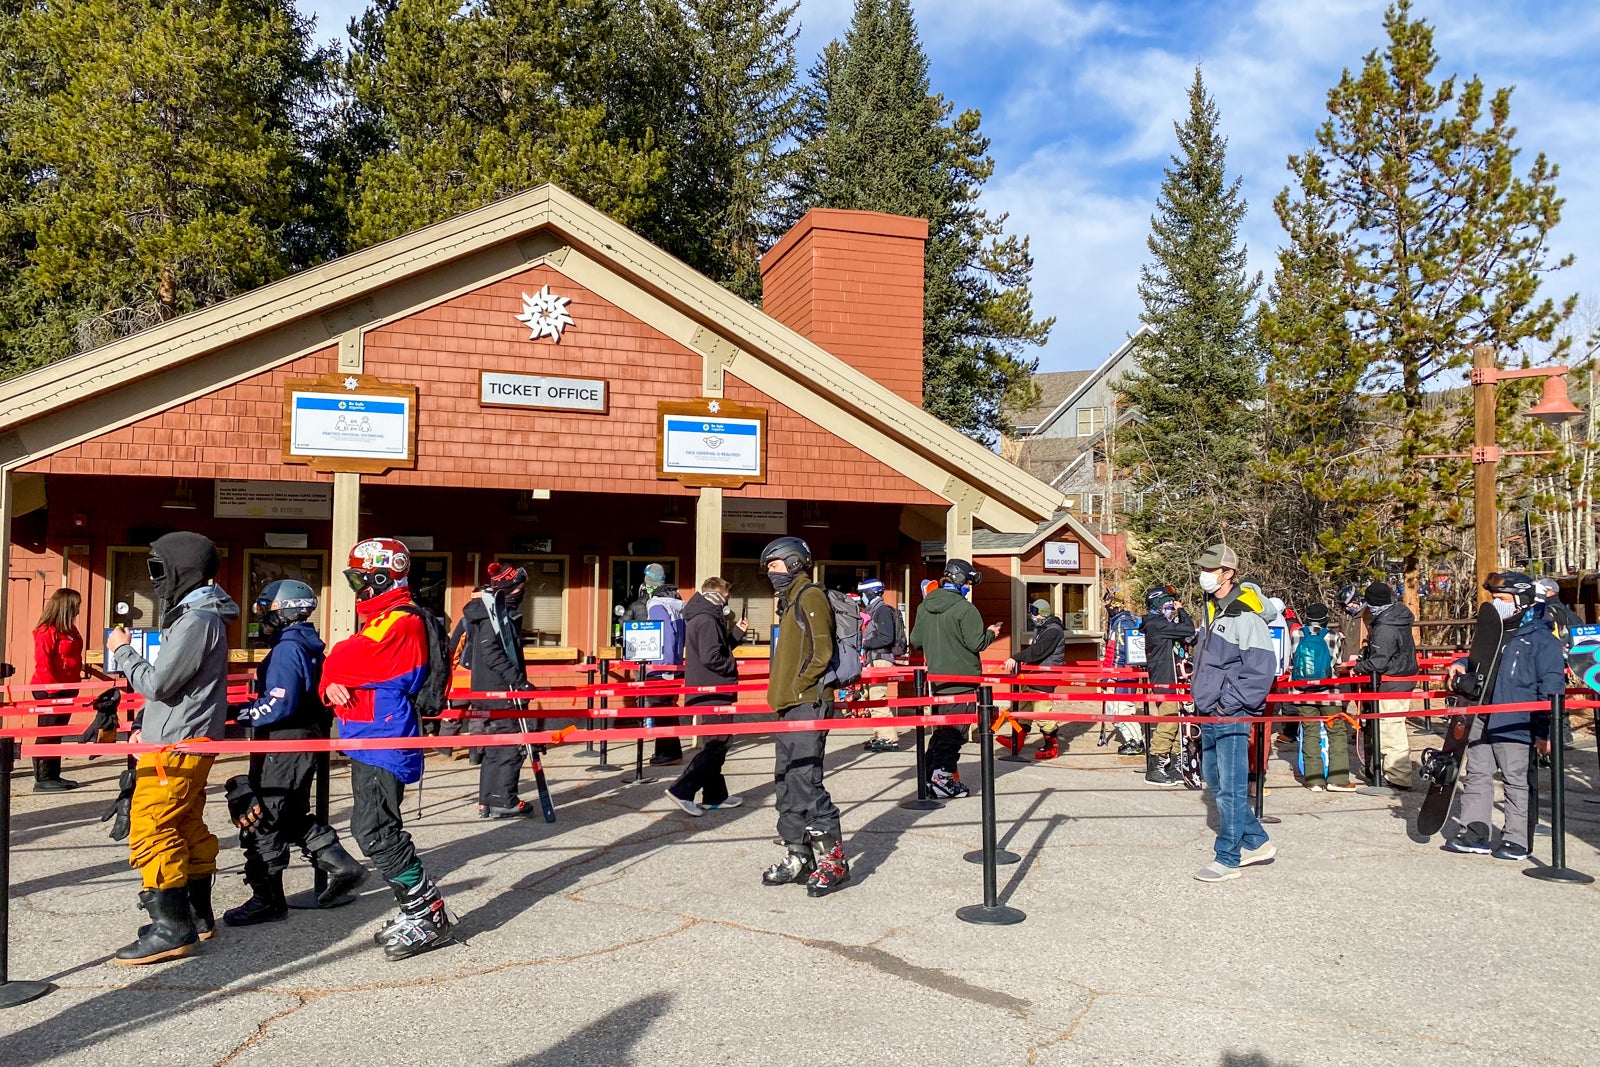 Vail Resorts liftticket sales capped; buy your Epic Pass by Dec. 4